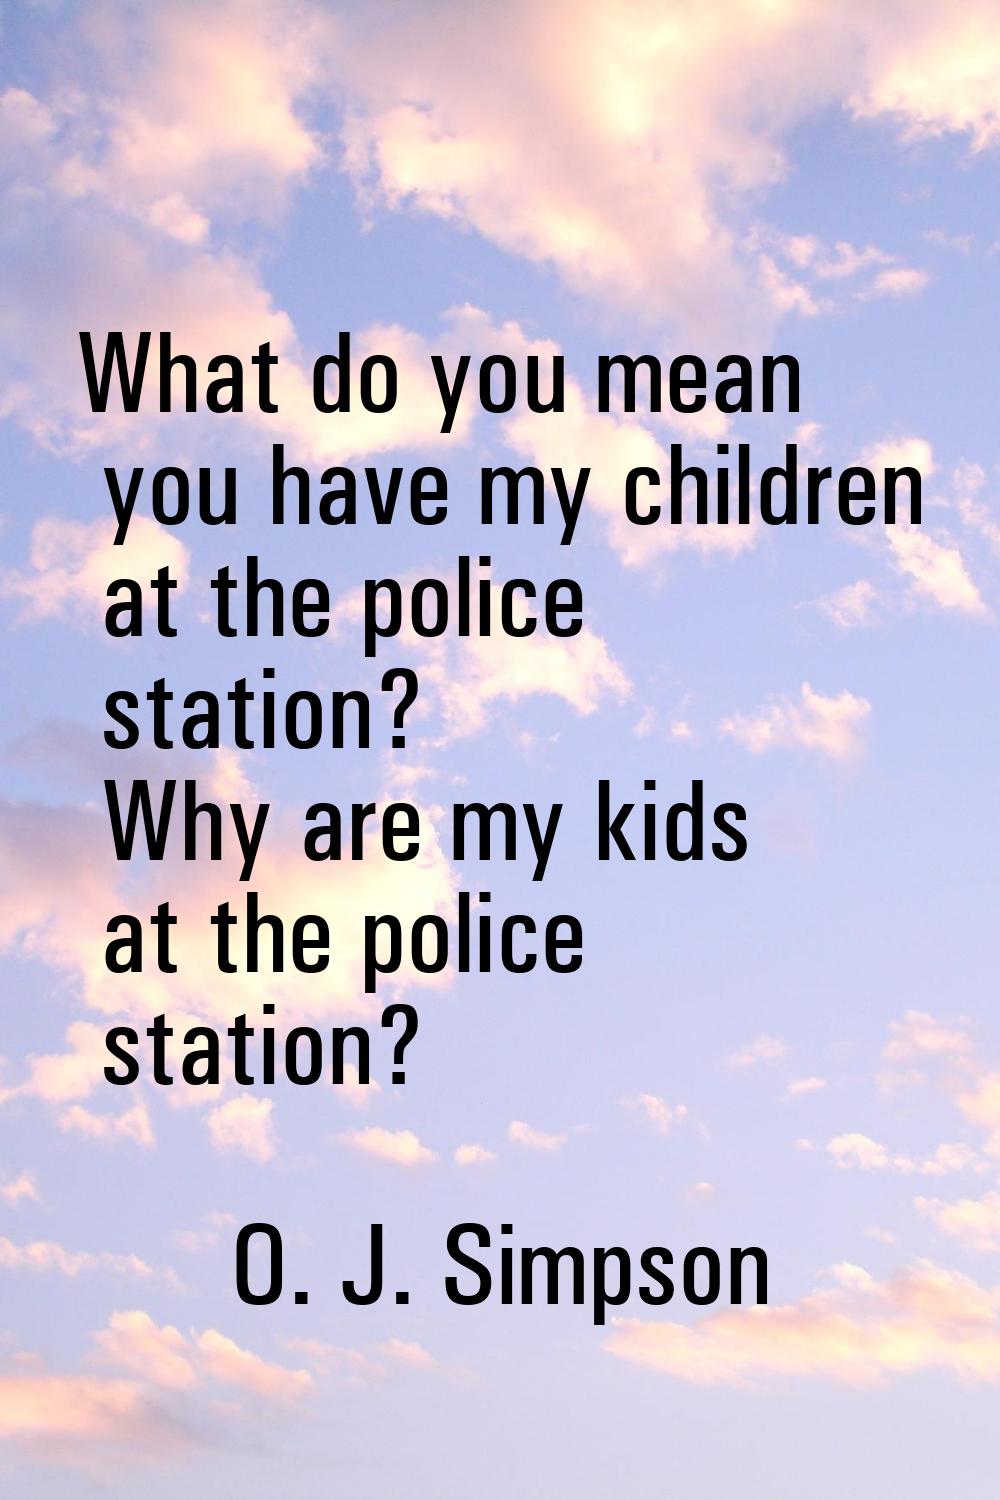 What do you mean you have my children at the police station? Why are my kids at the police station?